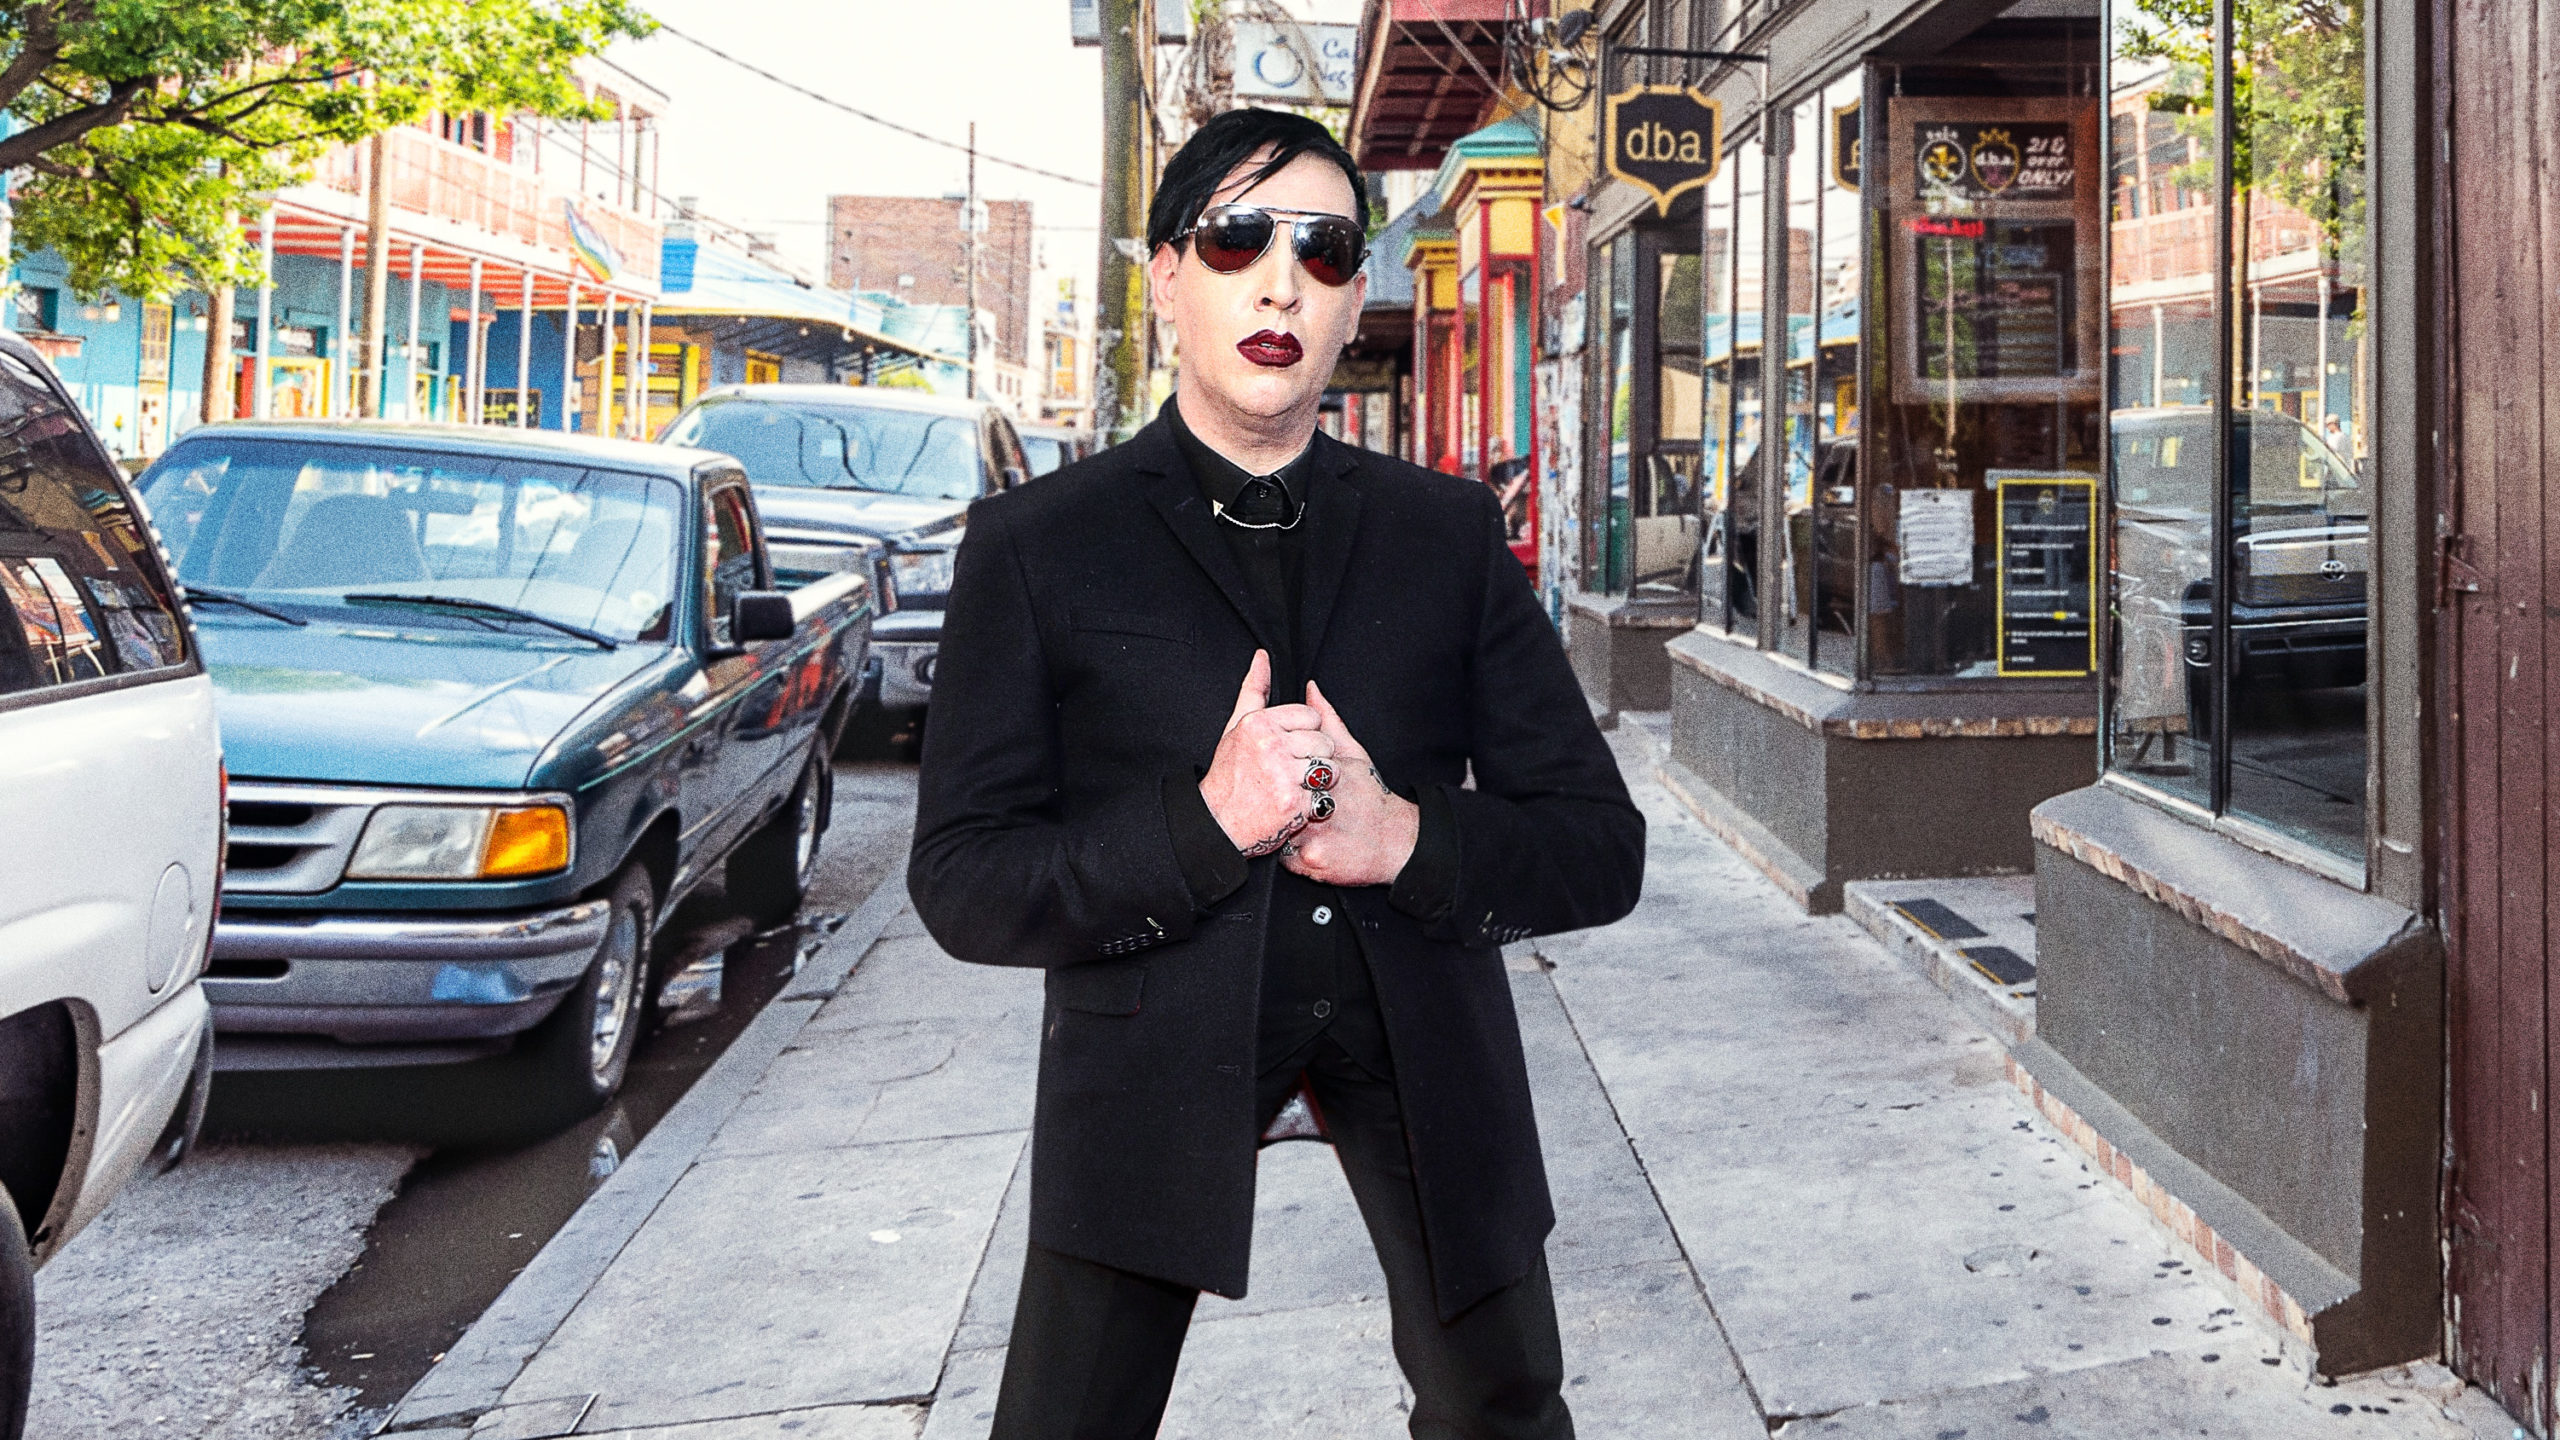 Clarifying The Rumors Marilyn Manson Has Revealed That He Actually Got ALL His Ribs Removed In Order To Suck SOMEONE ELSES Penis